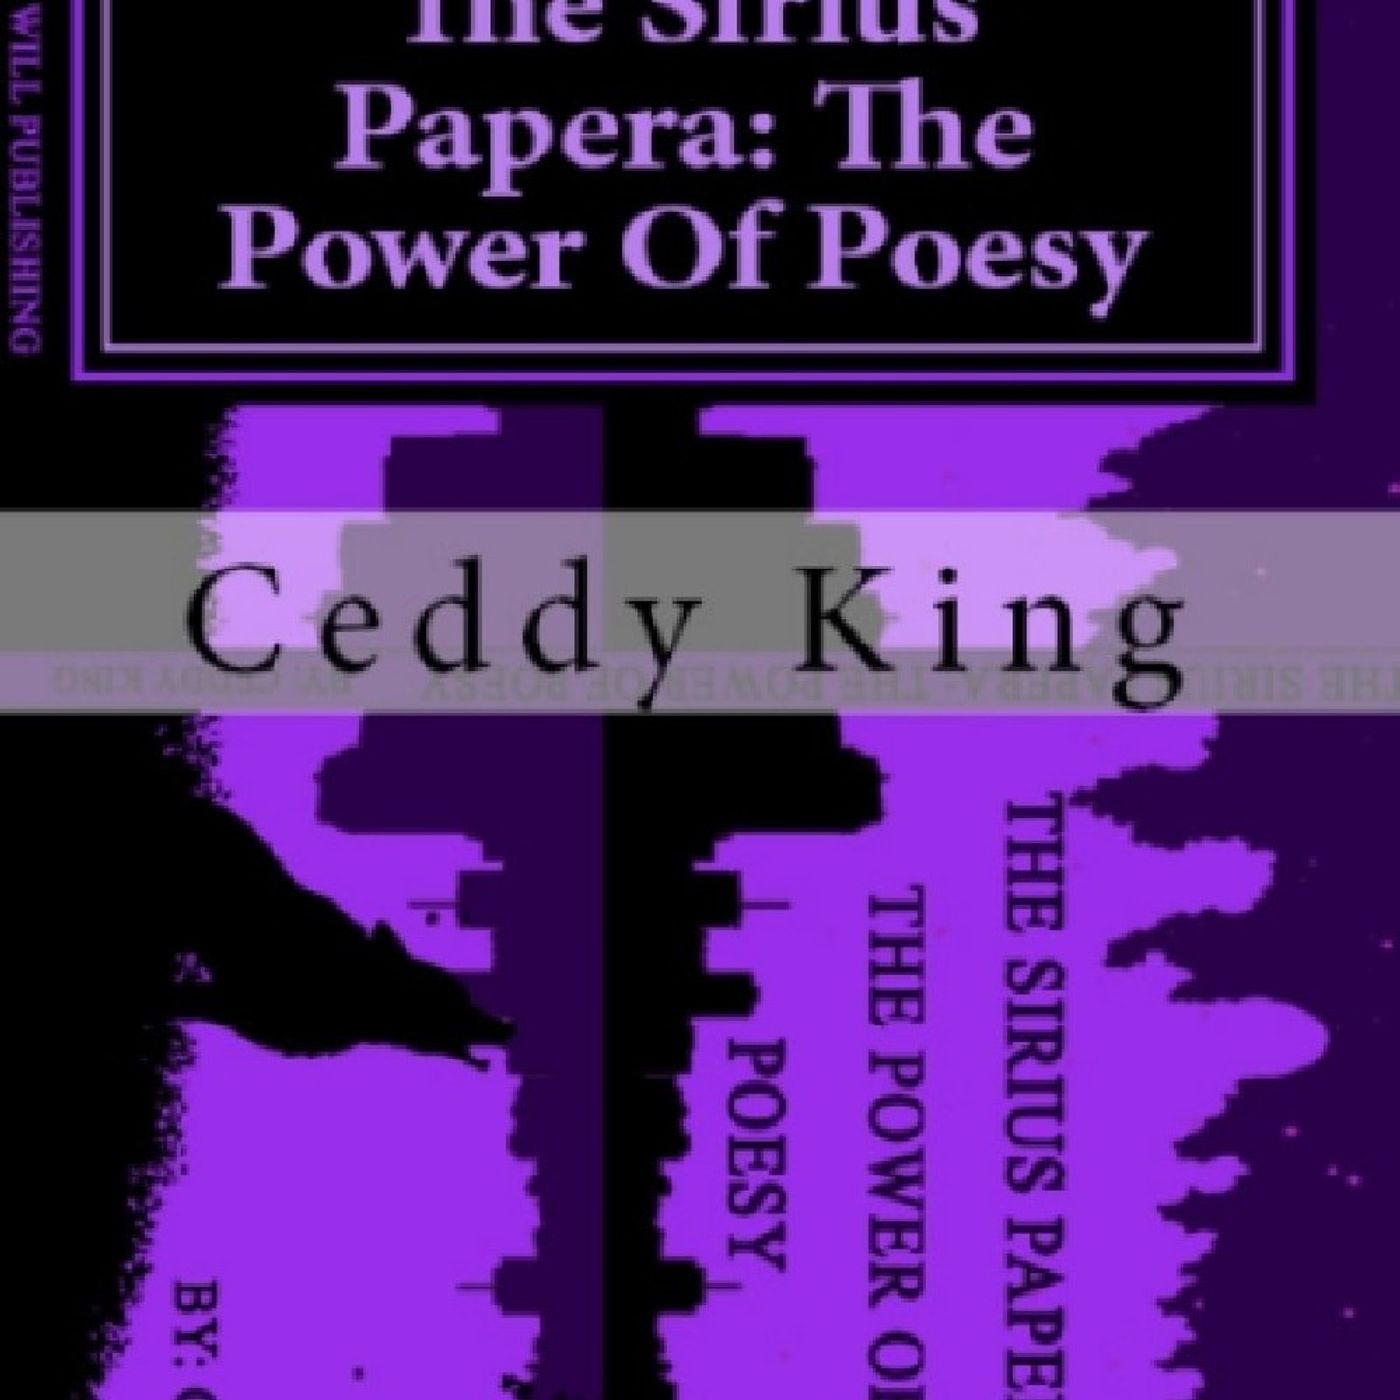 INTRODUCTION to The Power Of Poesy